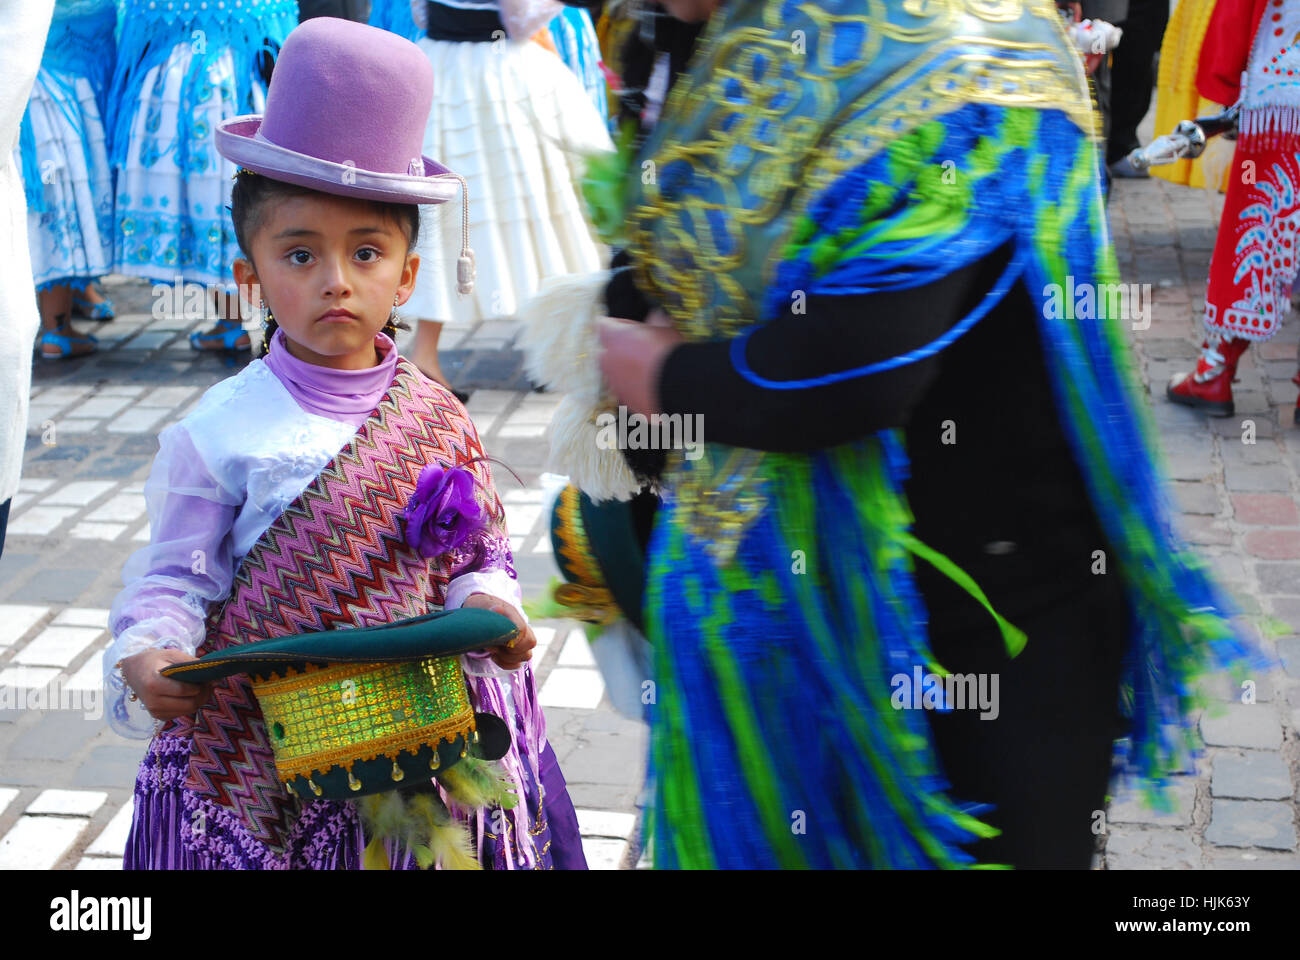 A little girl dressed up in traditional costumer ready to perform in the religious festival, Plaza de Armas, Cusco, Peru Stock Photo